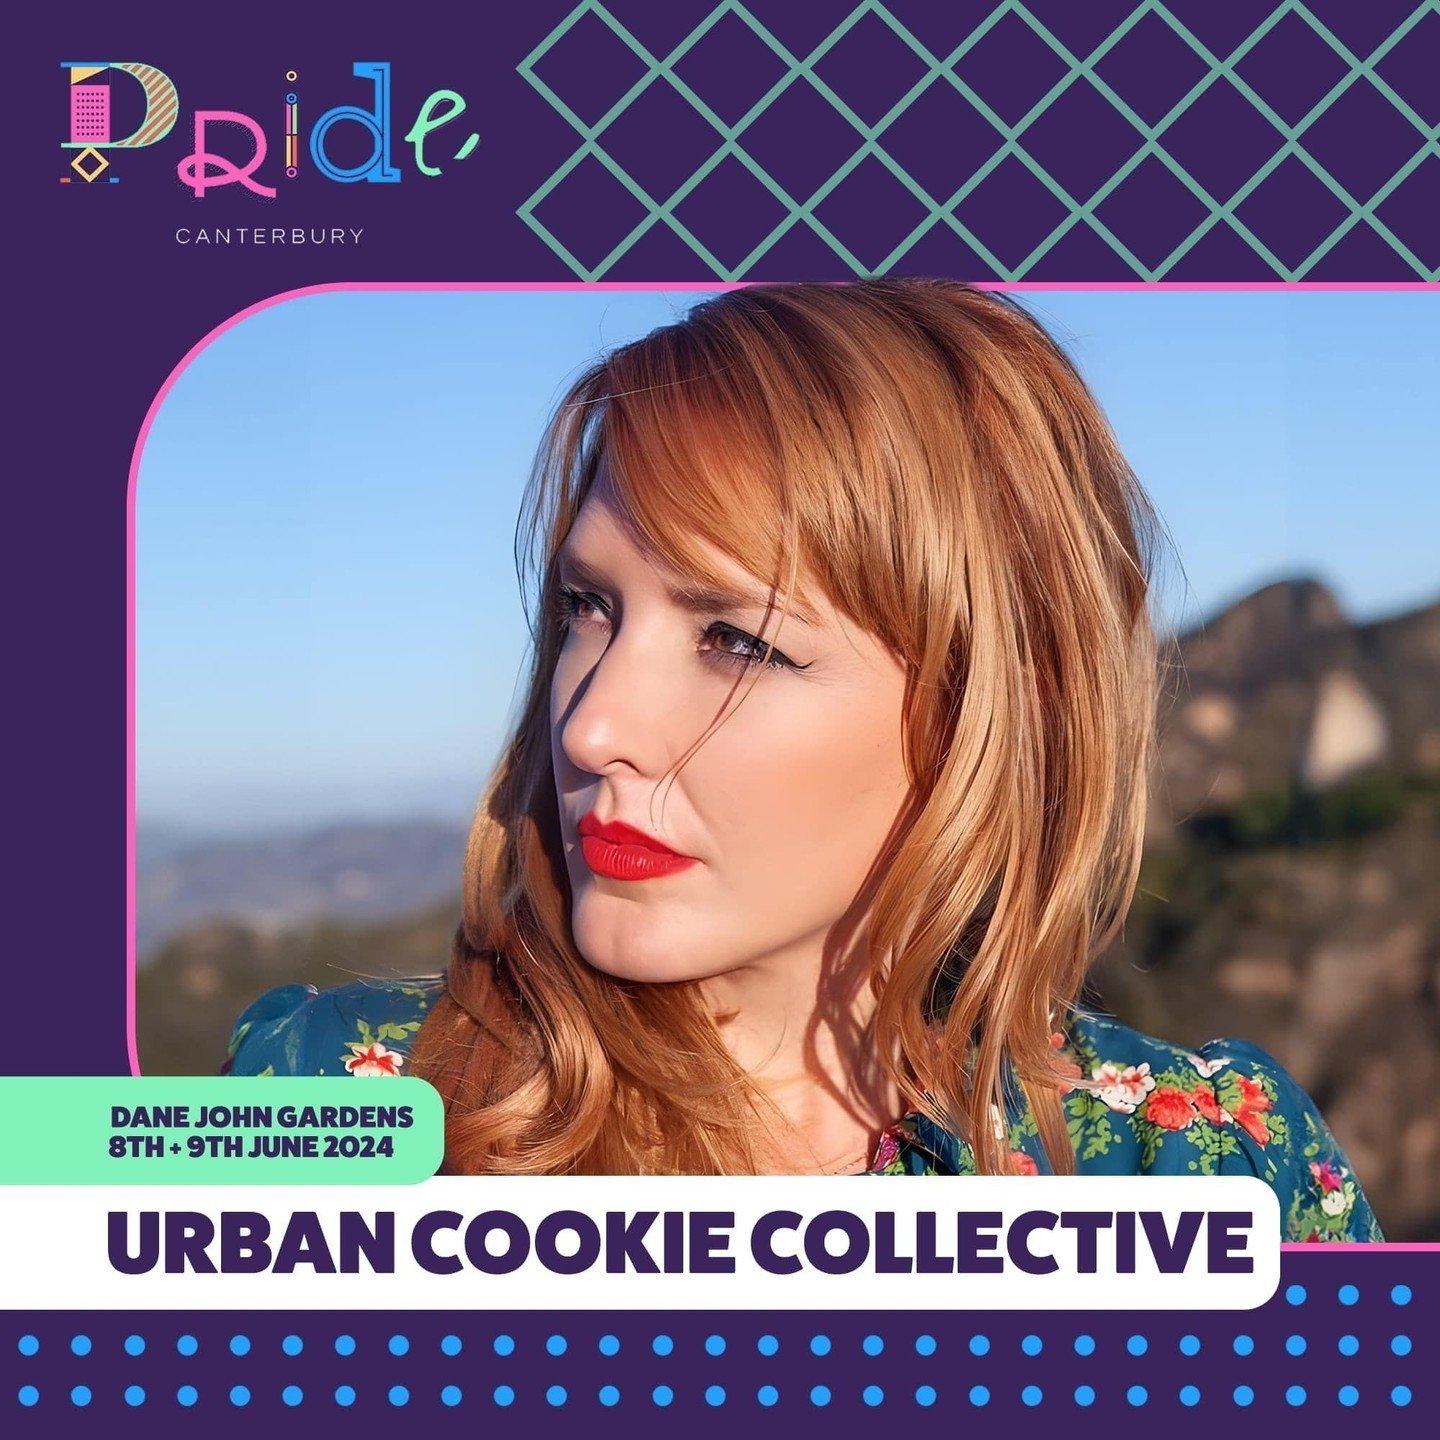 📣 Pride Canterbury 2024 line-up Announcement 

Urban Cookie Collective 
90s dance legends will be performing 'The Key, The Secret' and many other hits

@CharityShopSue
YouTube and LGBTQ+ star will be doing a DJ set

@LadyM_Mcmanus
She is a Pop Idol 